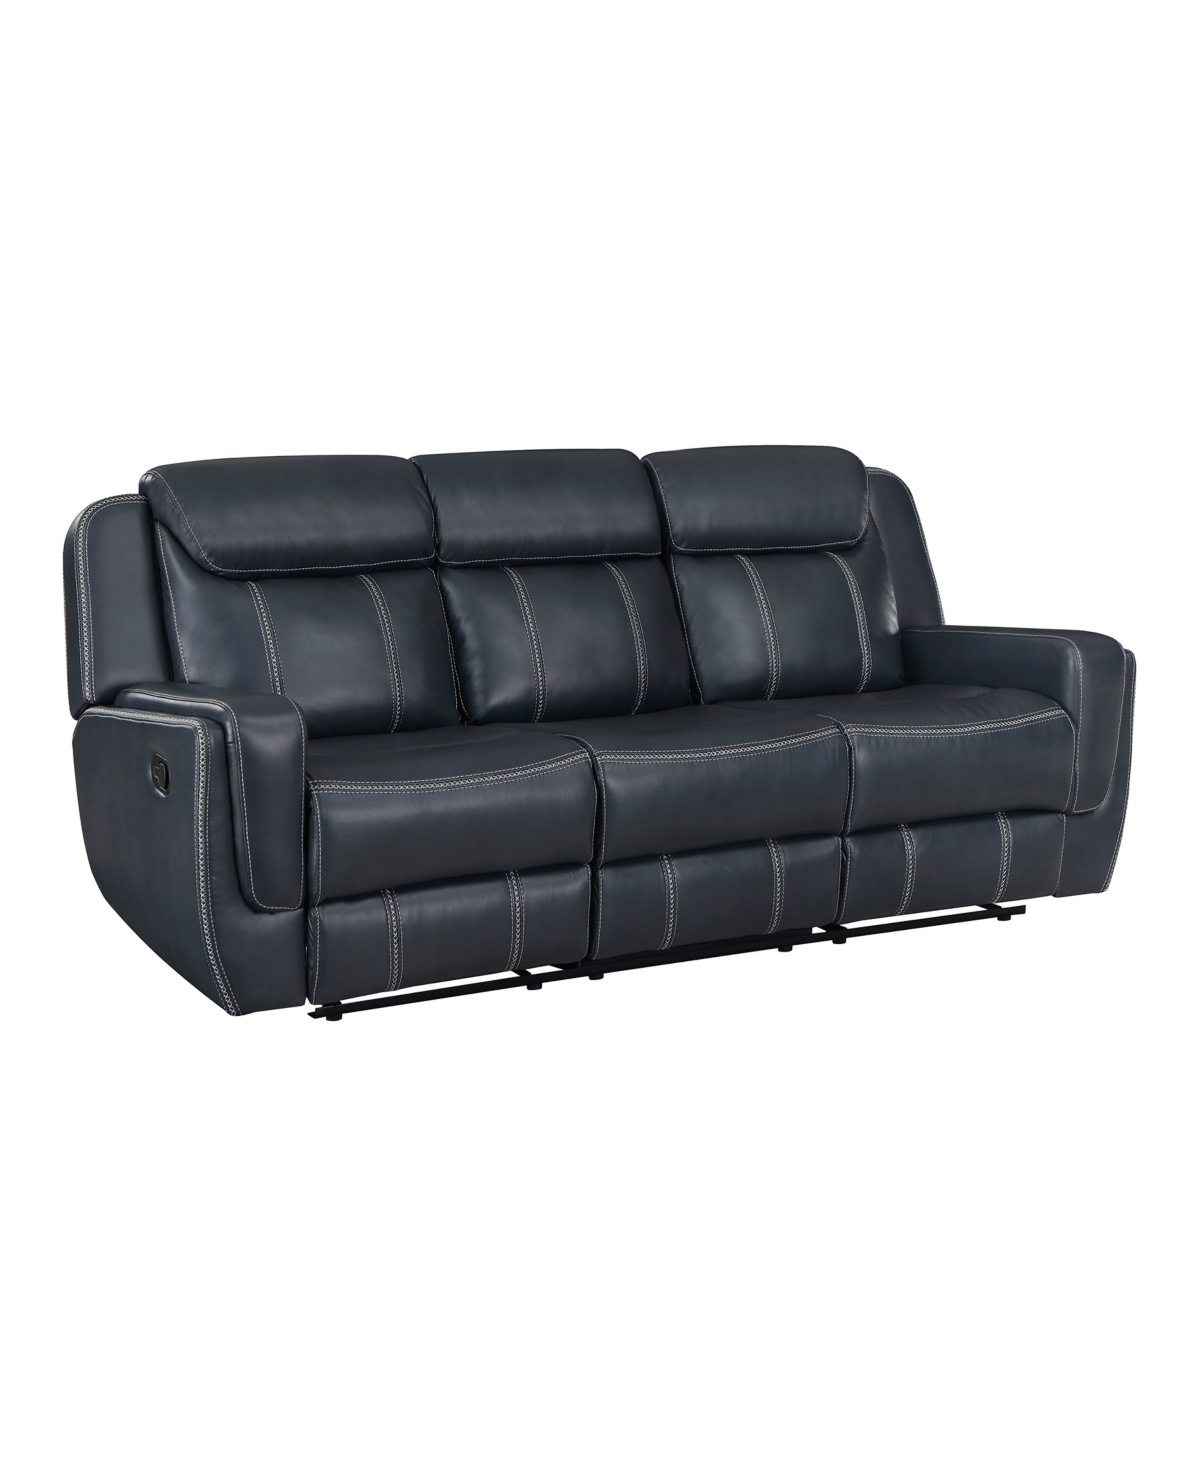 Homelegance White Label Emilia 86" Double Reclining Sofa With Center Drop-down Cup Holders In Blue